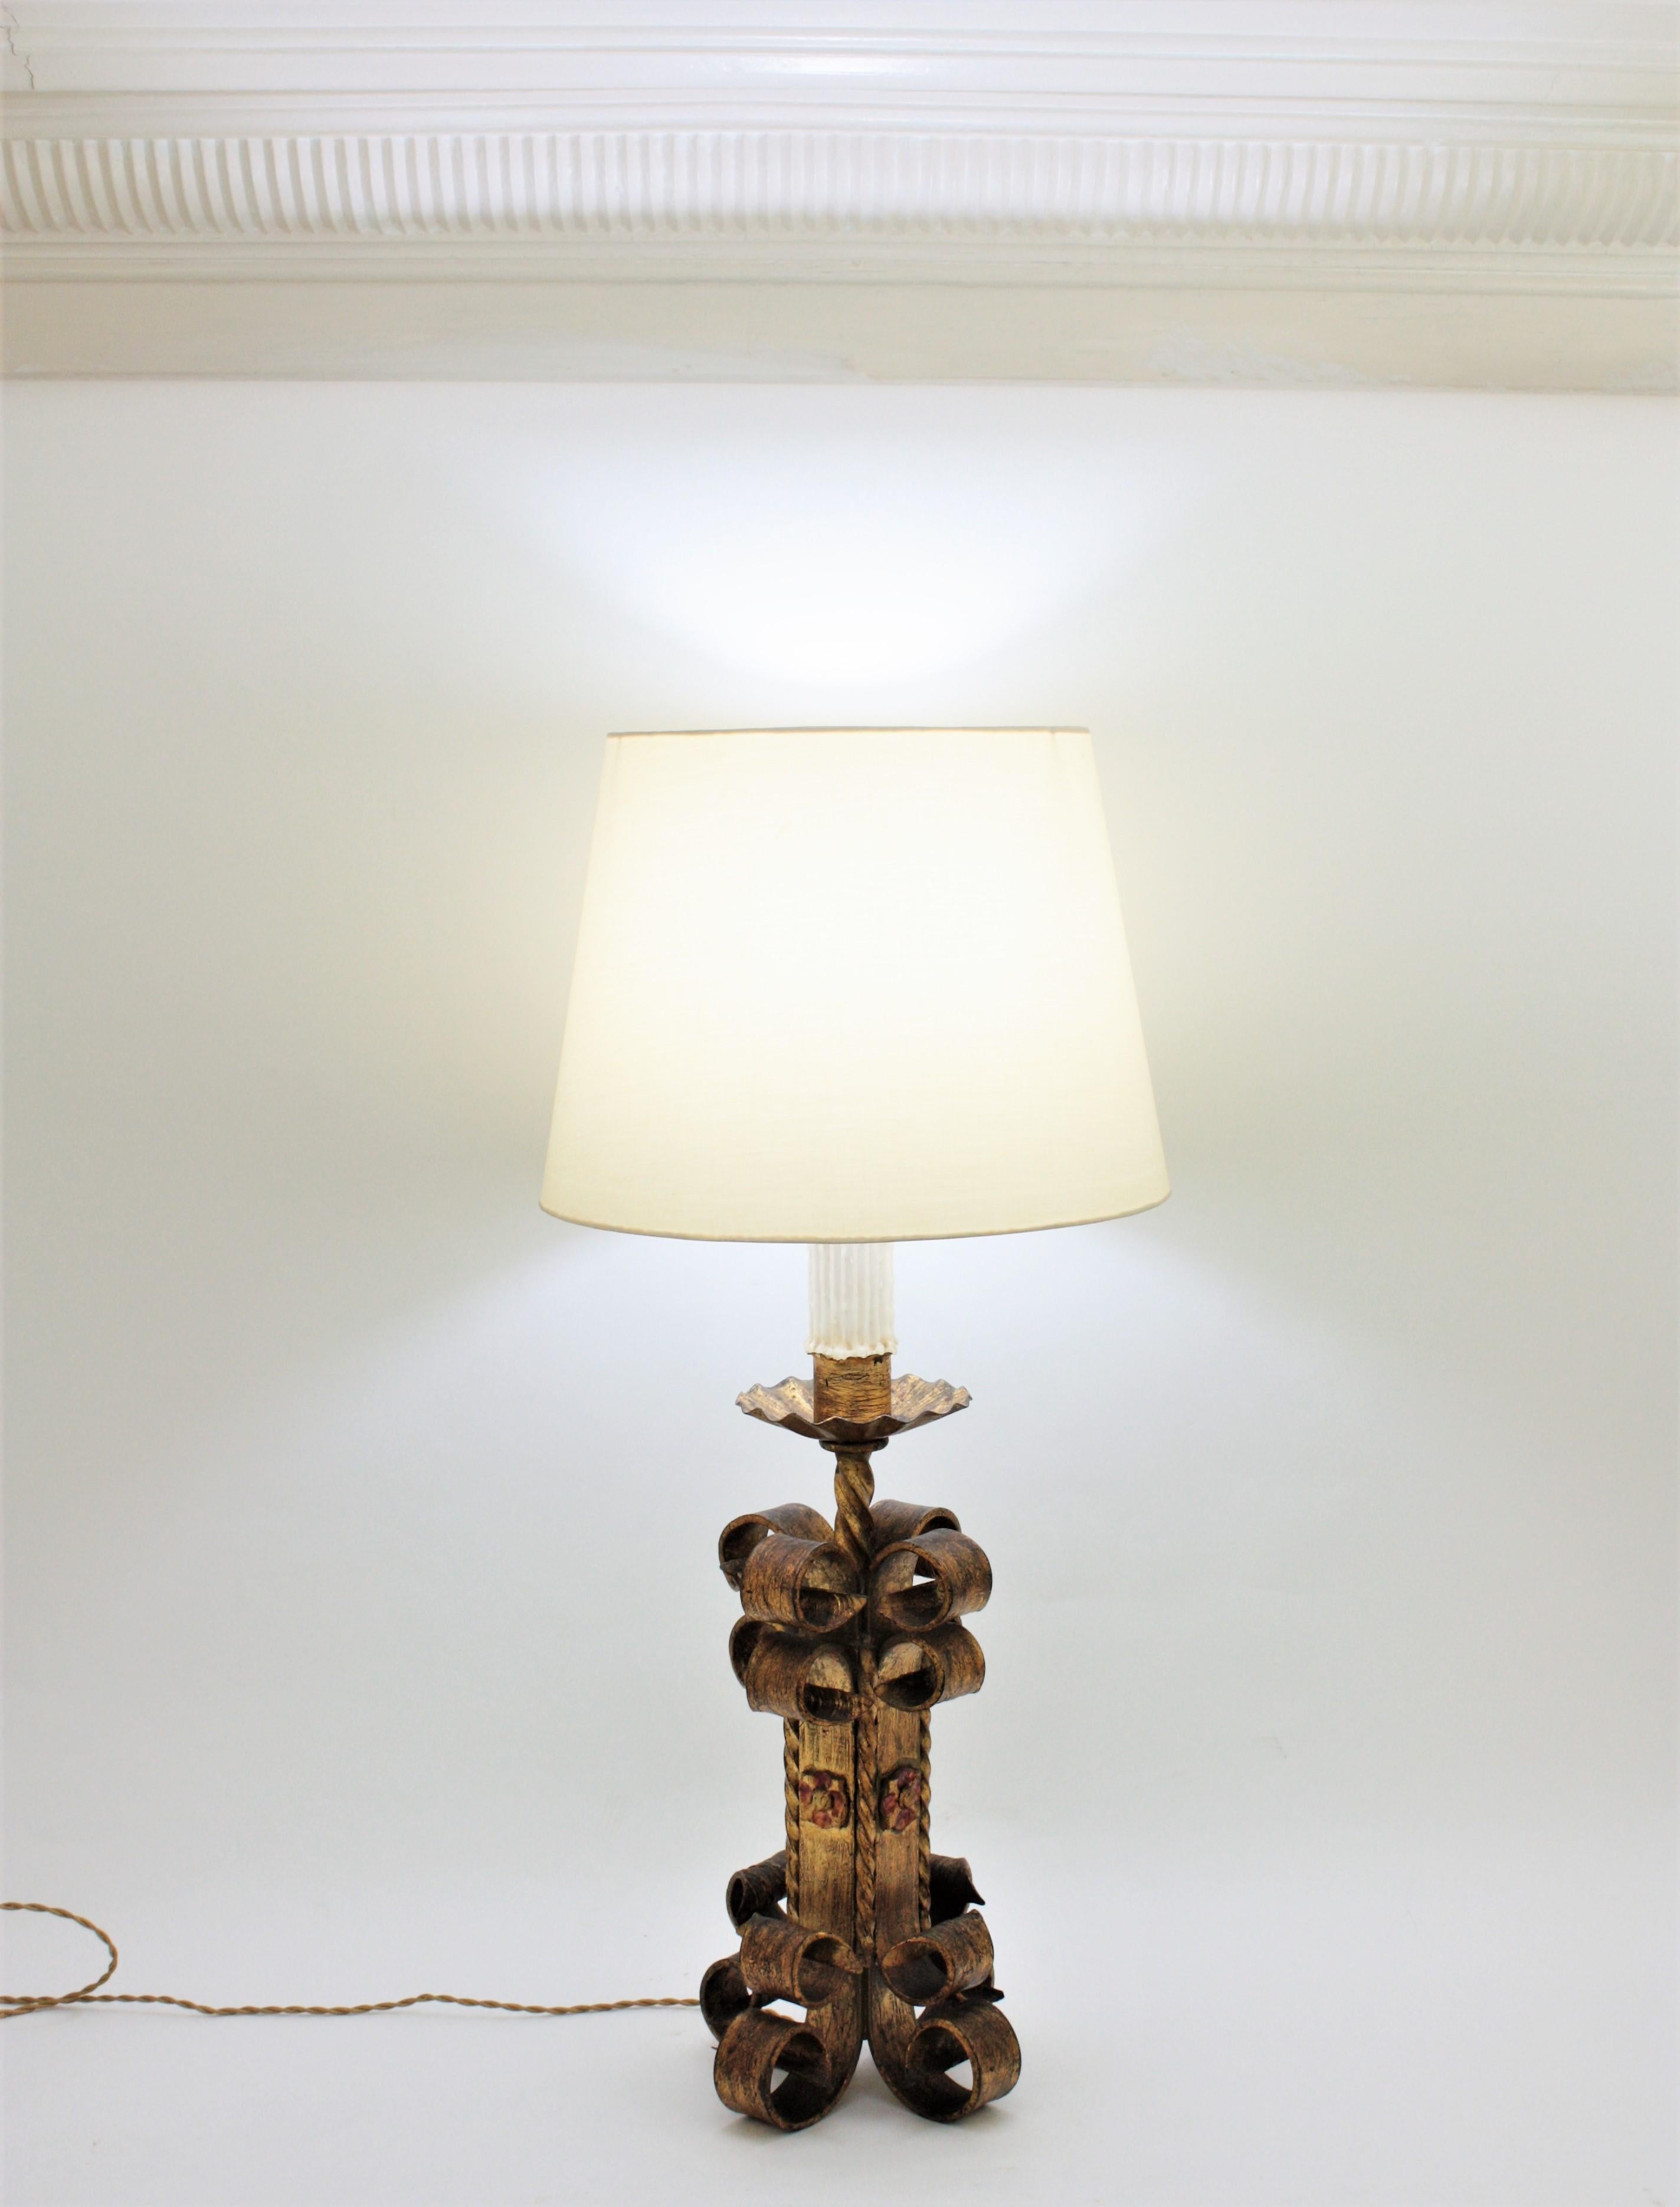 Spanish Revival Scrollwork Table Lamp in Gilt Wrought Iron, 1940s For Sale 4